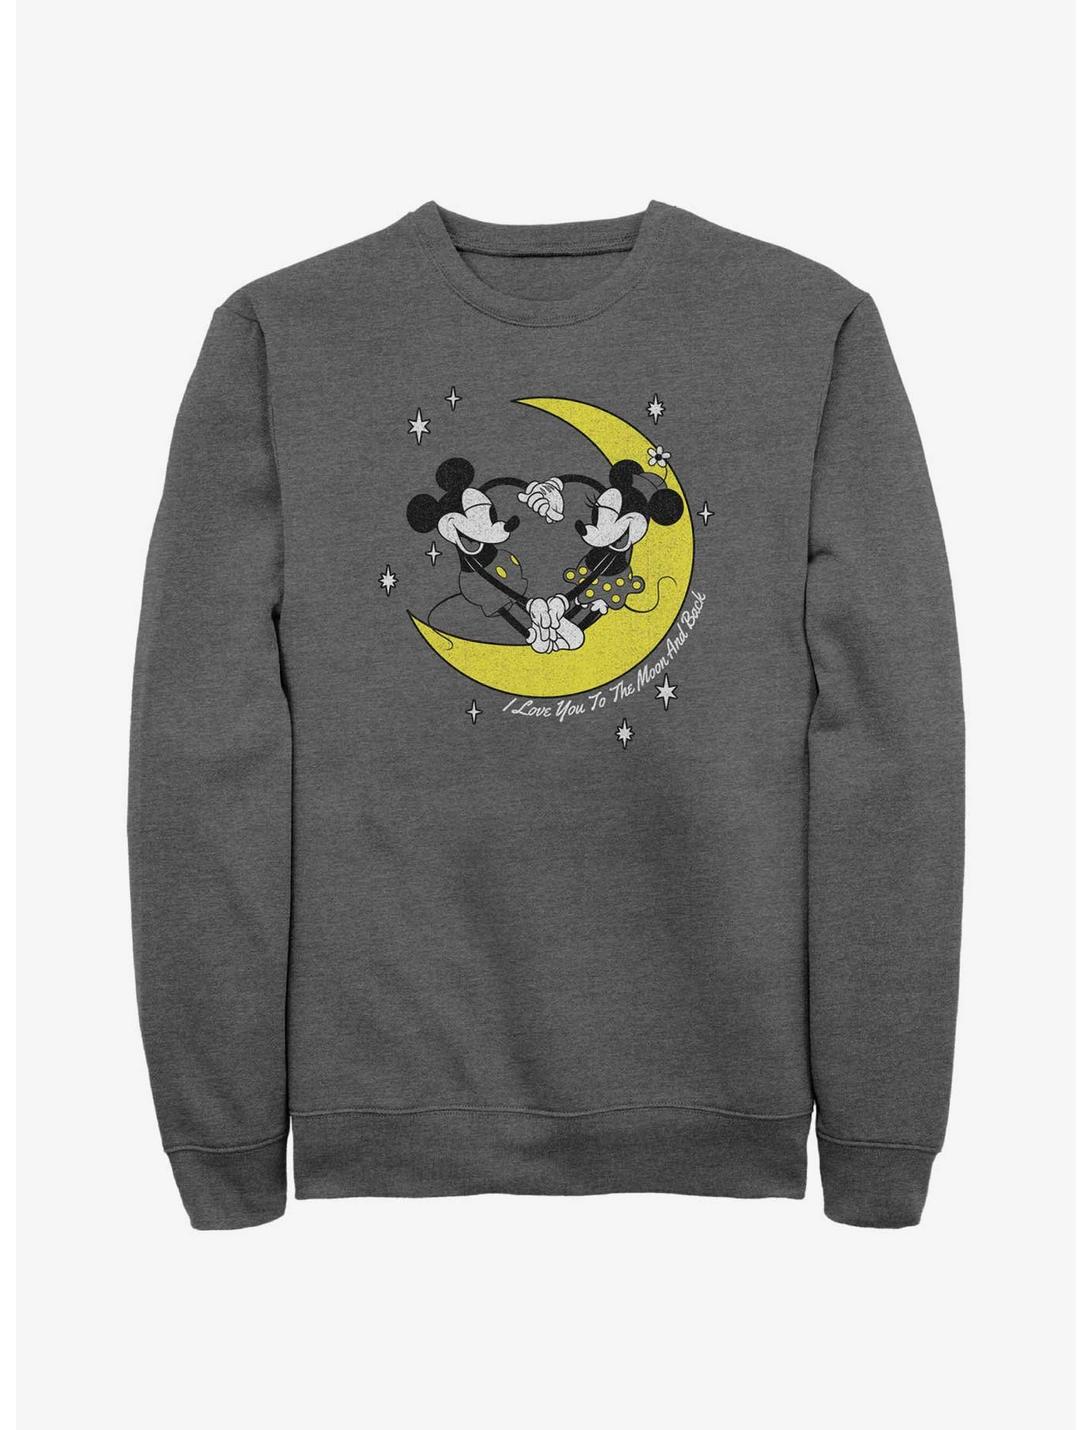 Disney Mickey Mouse & Minnie Mouse I Love You To The Moon And Back Sweatshirt, CHAR HTR, hi-res